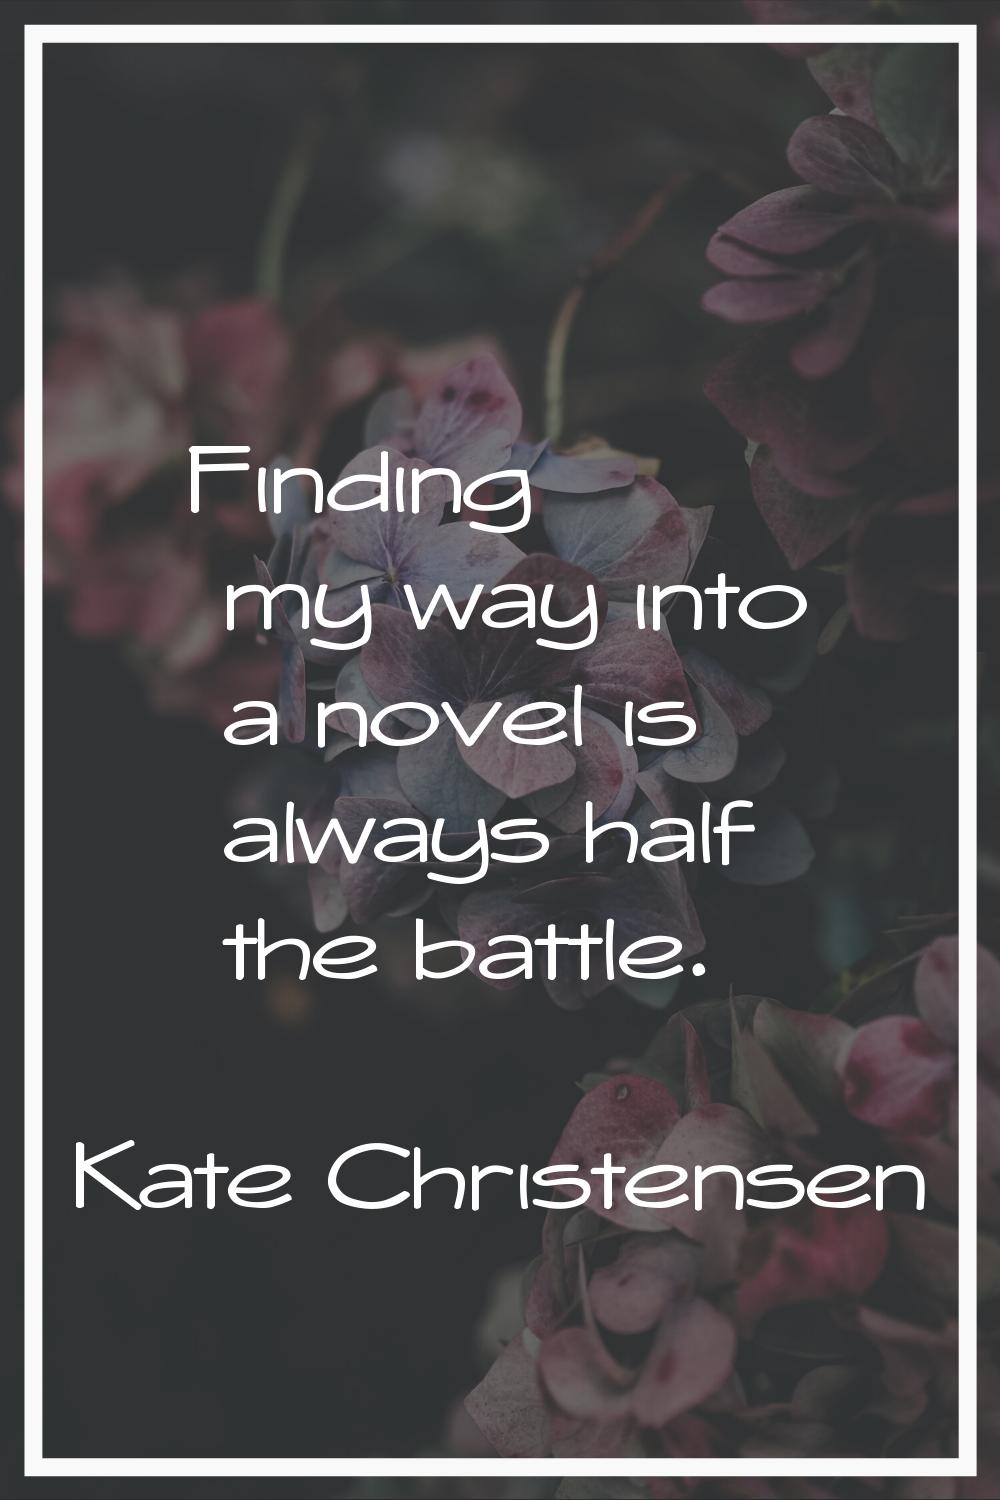 Finding my way into a novel is always half the battle.